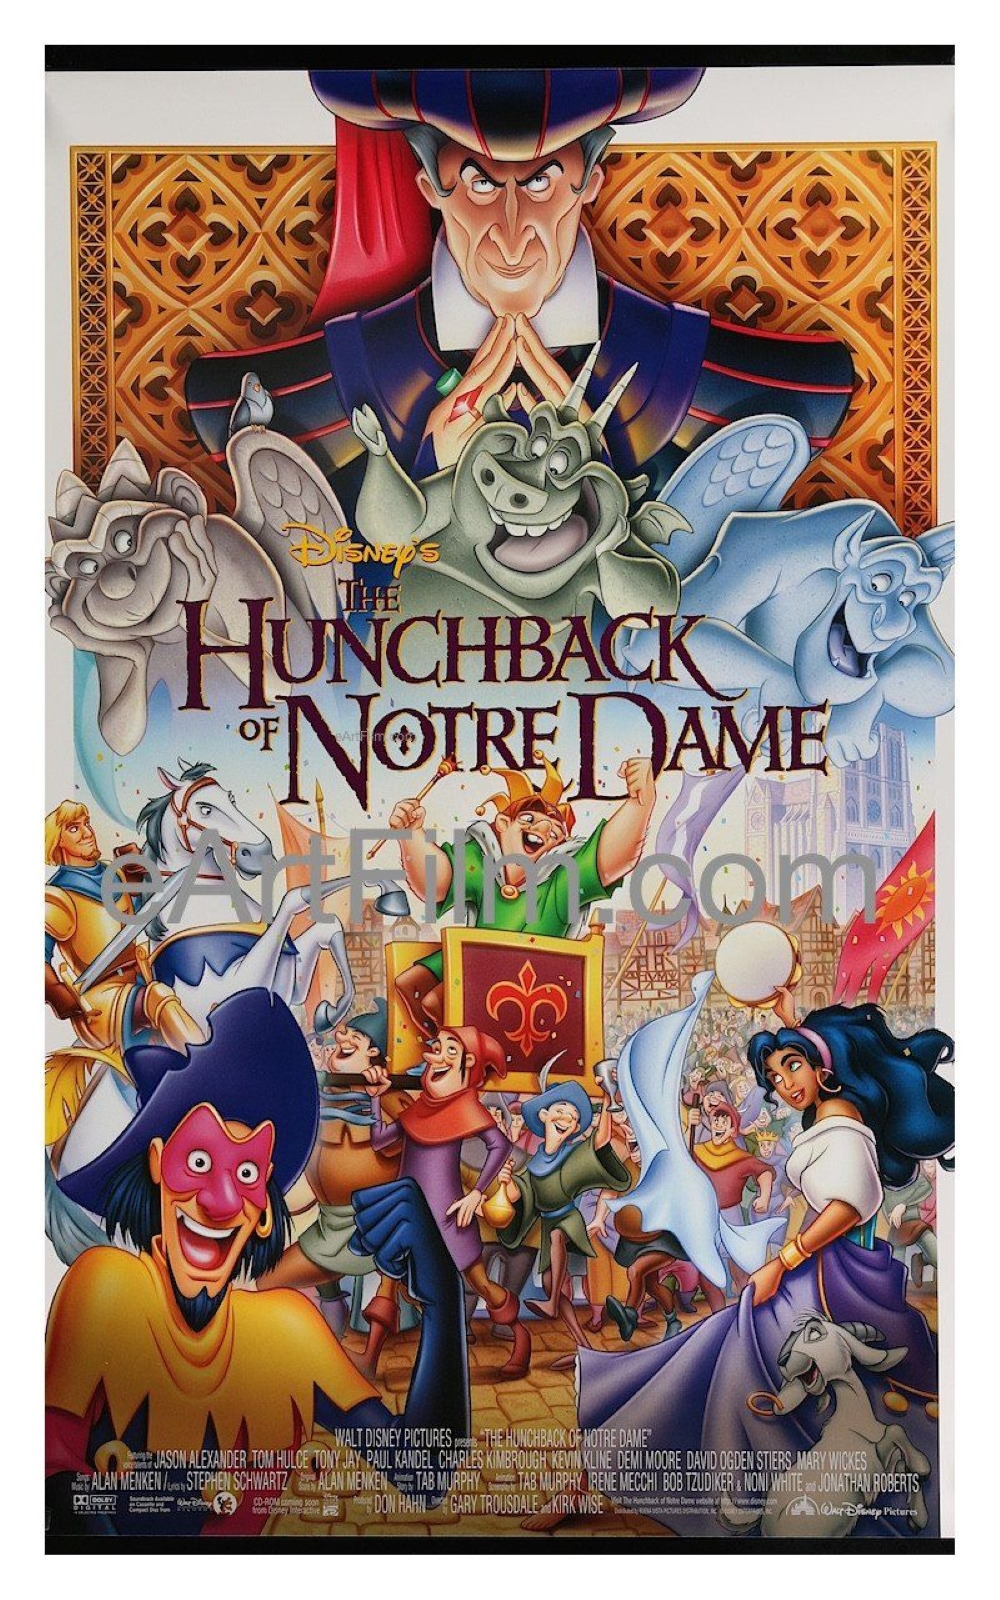 'The Hunchback of Notre Dame' (1996): Mr. Trousdale directed in coop with Kirk Wise and is the Old Man's voice.